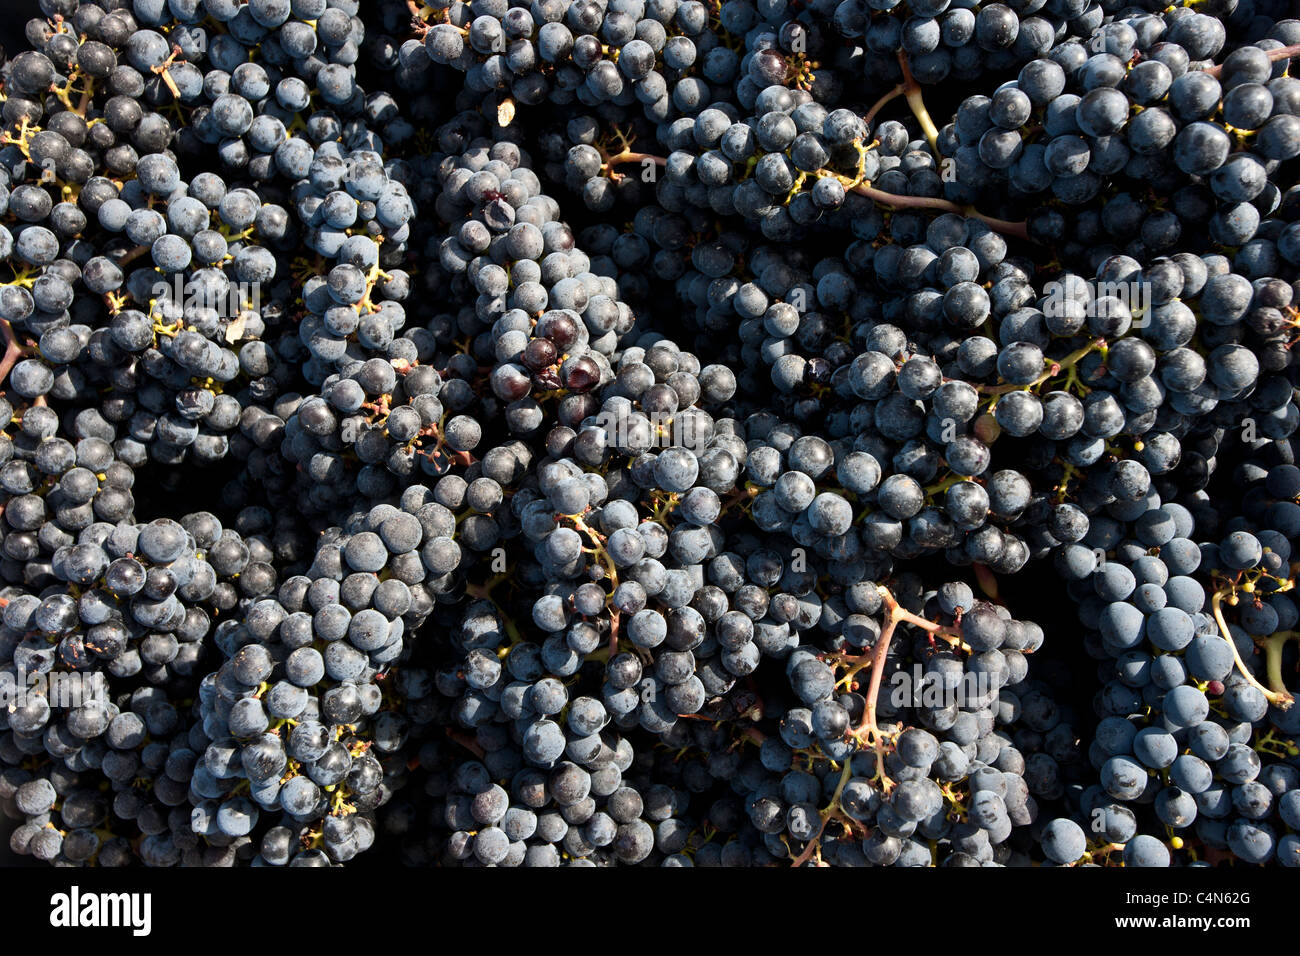 Freshly picked ripe Merlot grapes harvest at famous Chateau Petrus wine estate at Pomerol in Bordeaux region, France Stock Photo